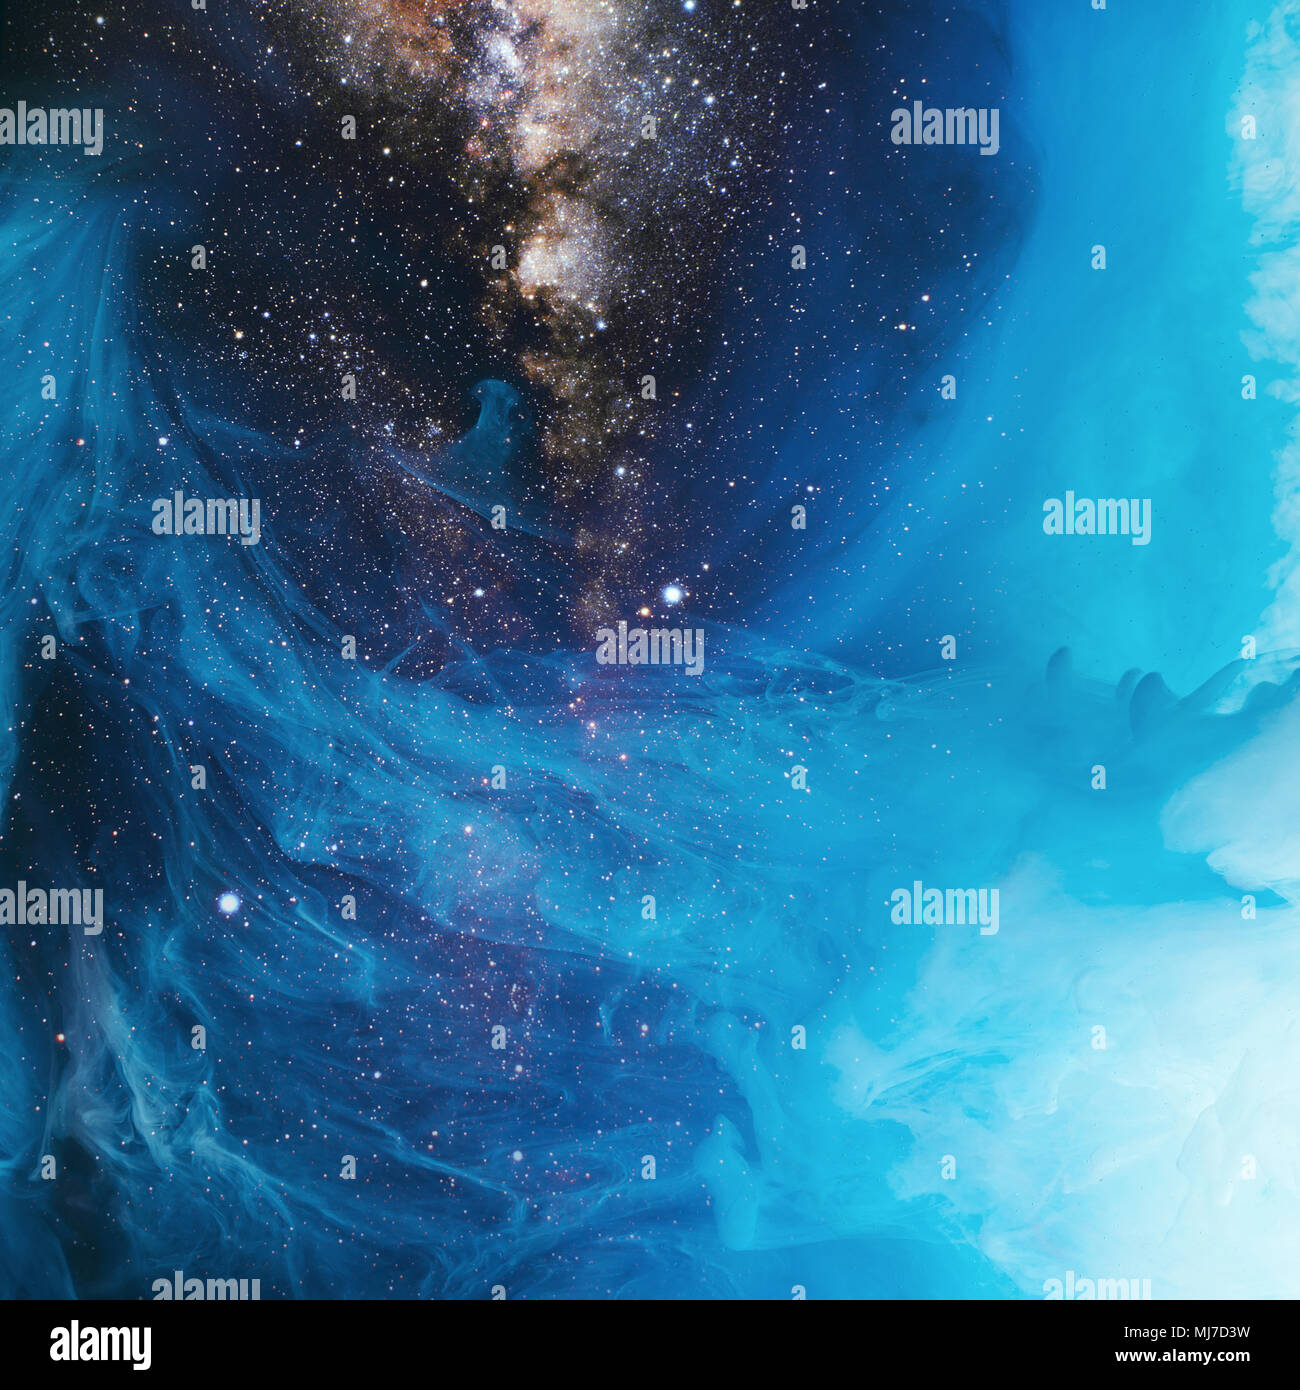 full frame image of mixing blue and black paint splashes in water with universe background Stock Photo